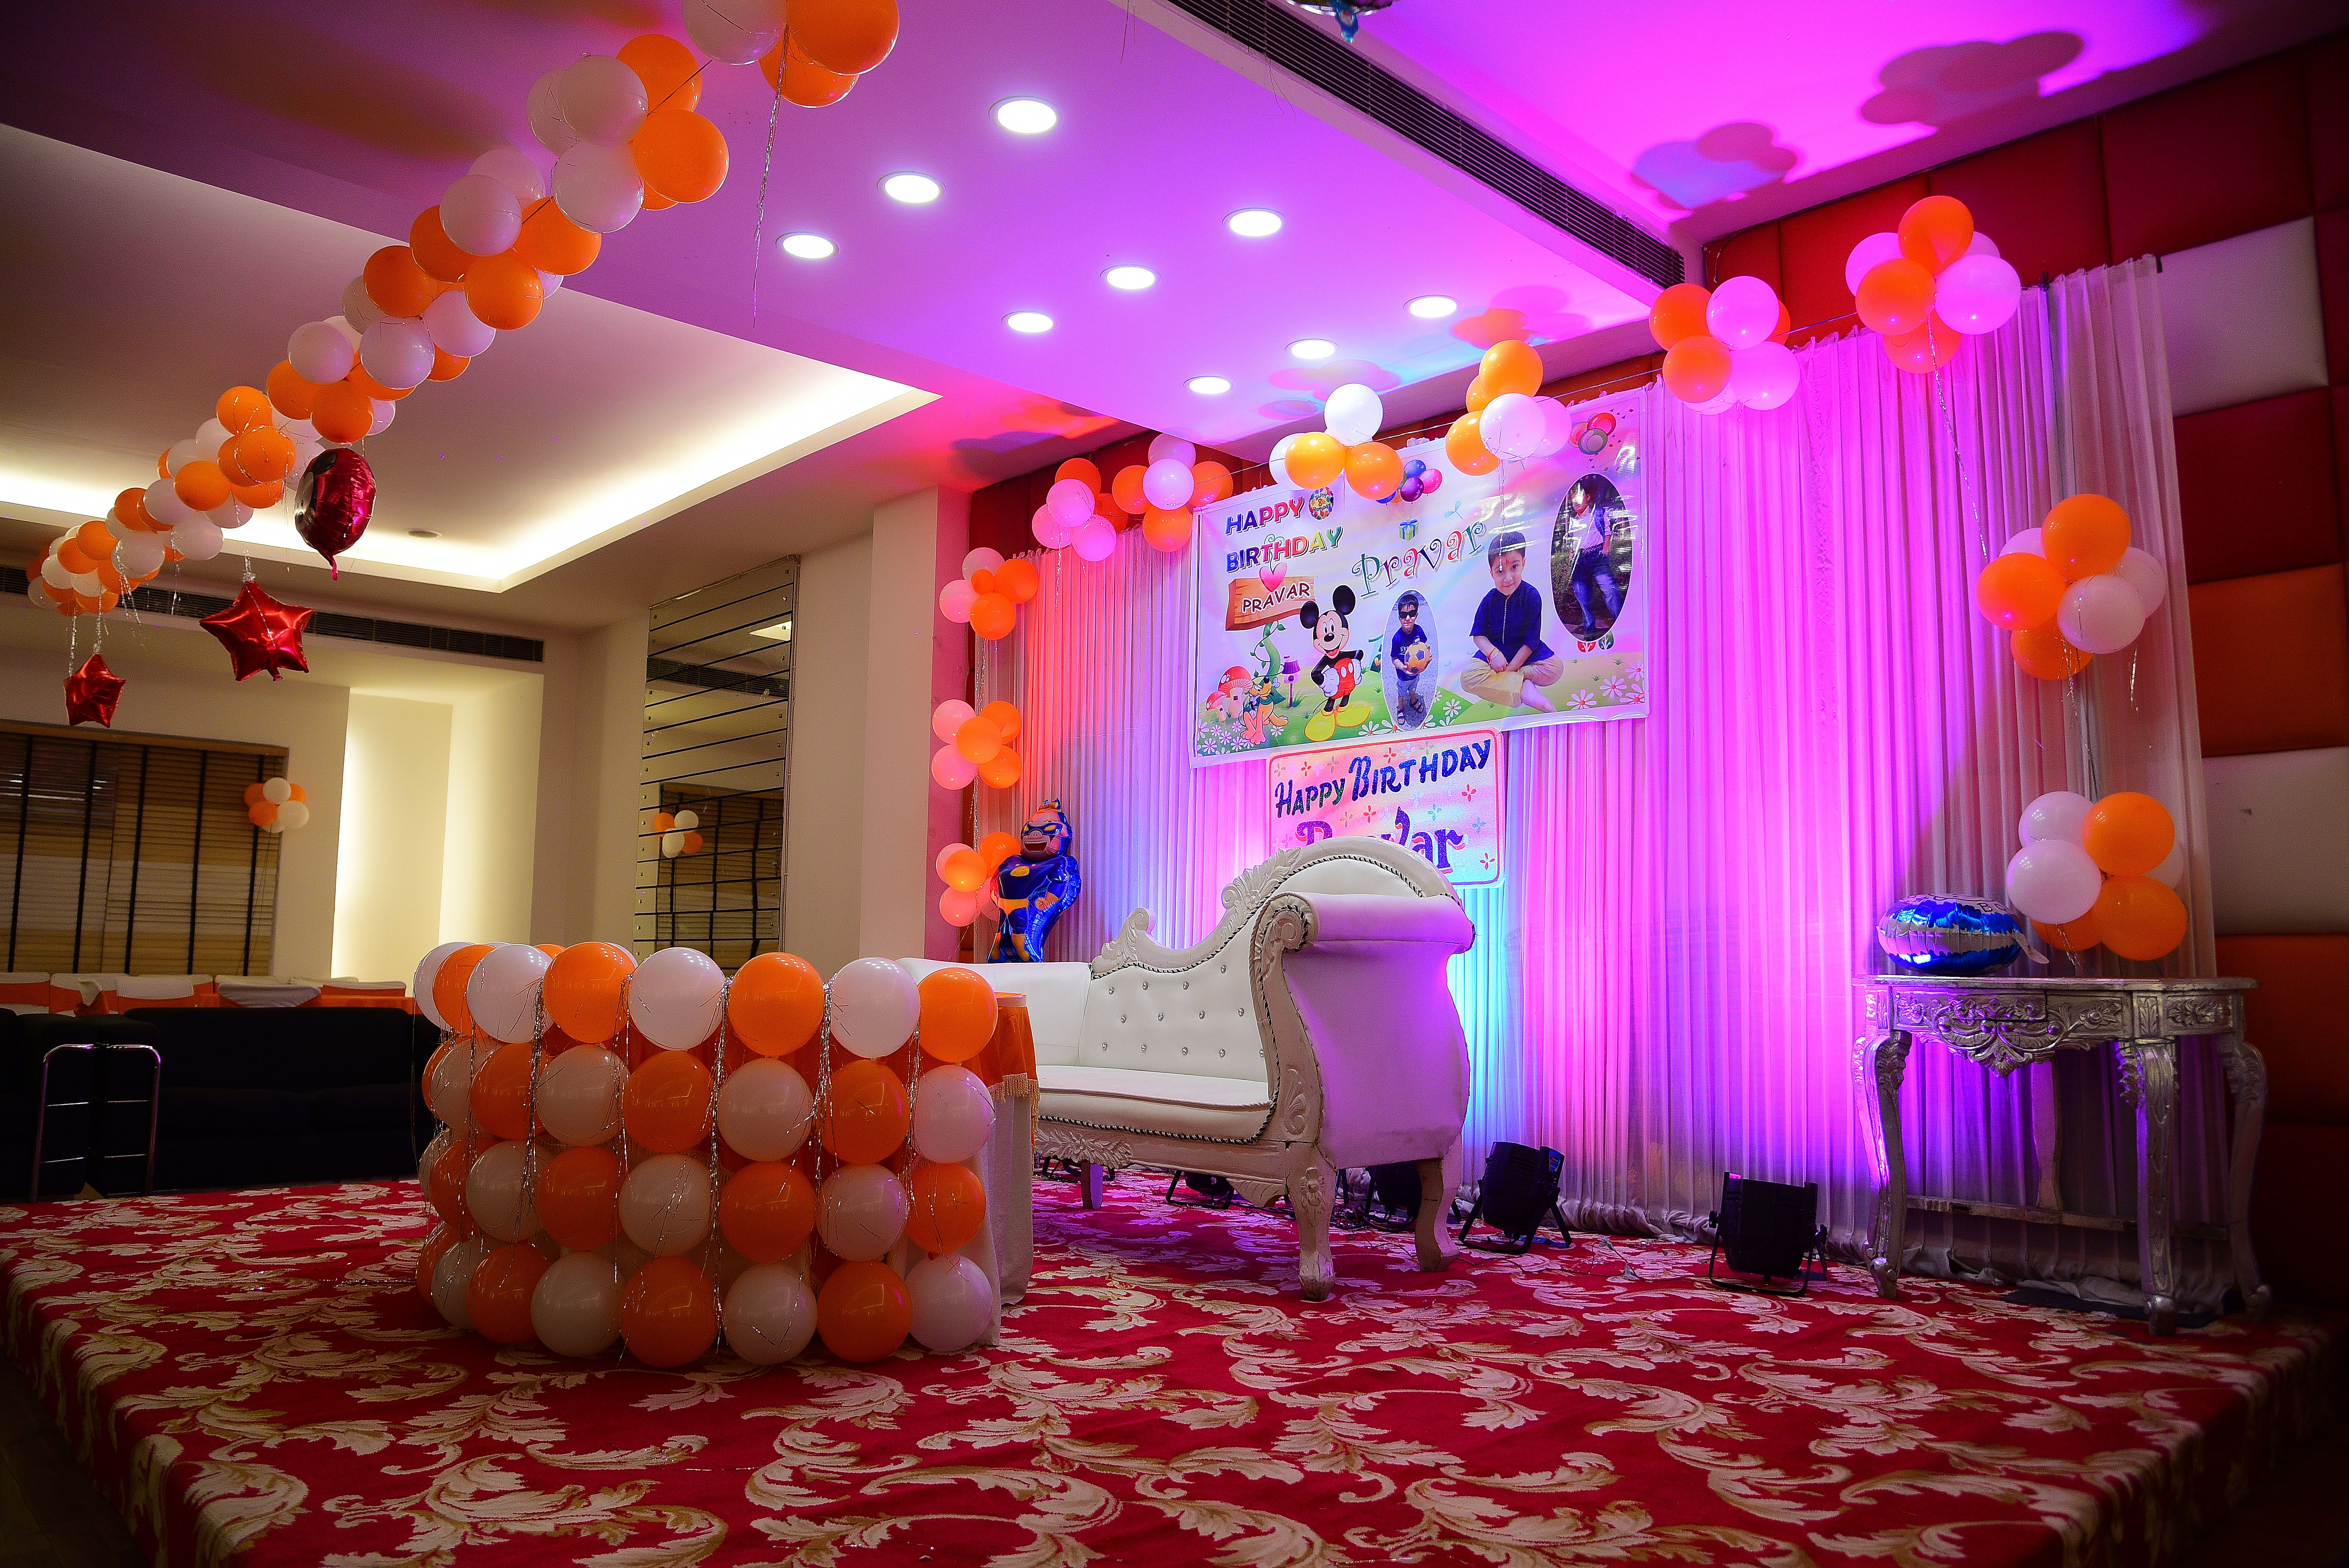 Star Banquets in Sector 9, Gurgaon